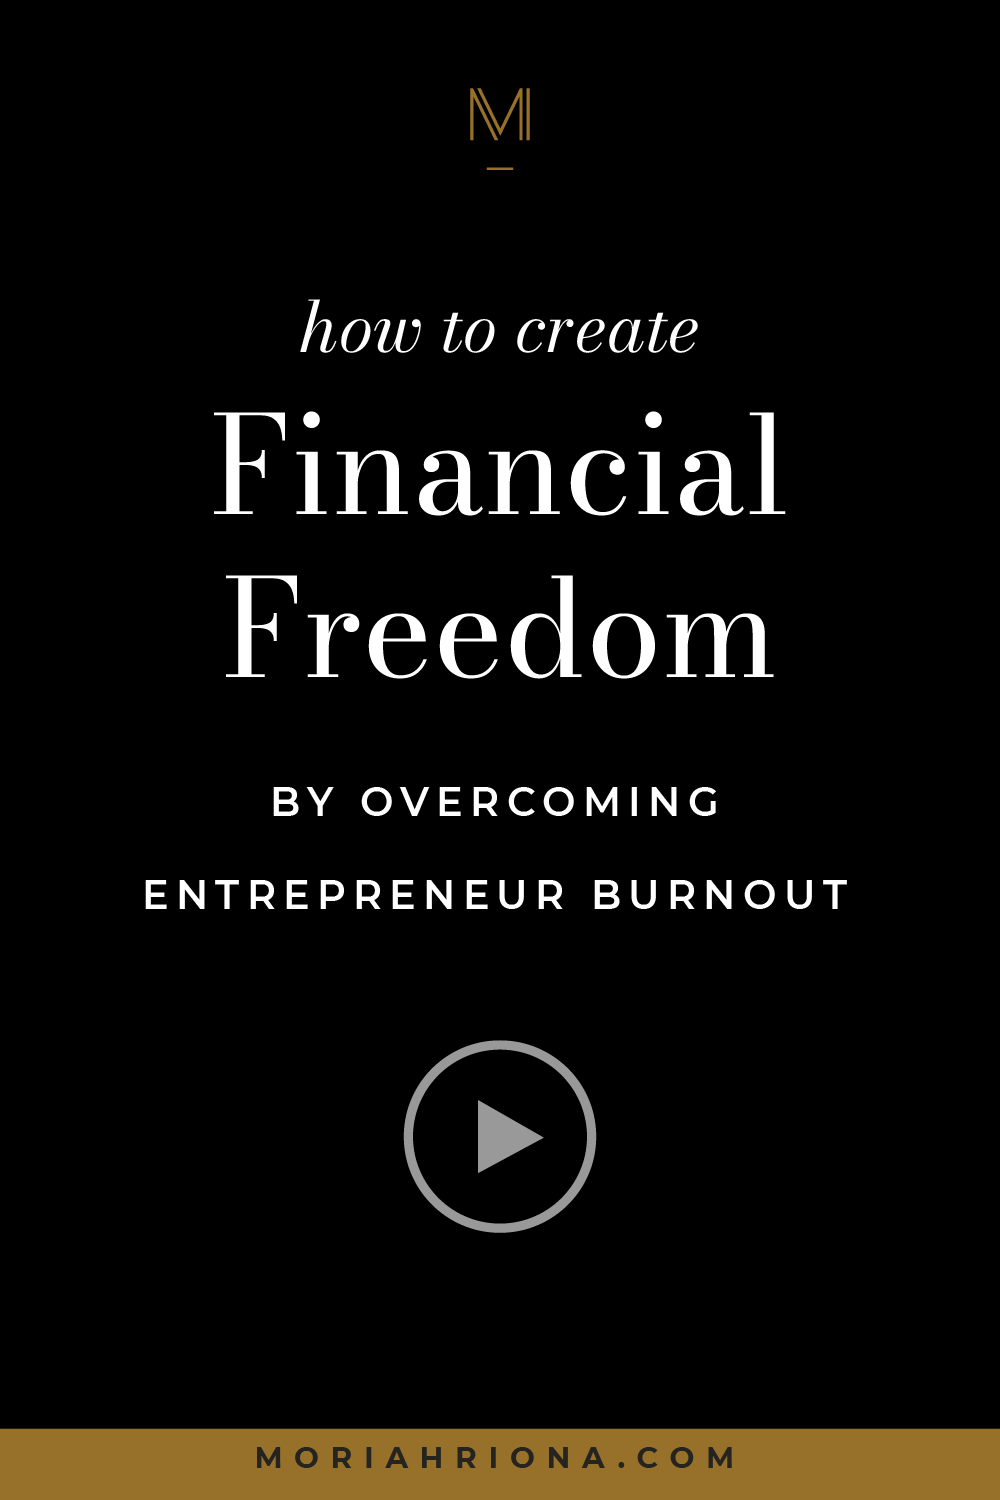 Want to hear how to conquer entrepreneur burnout? This blog post is for you! Discover how making small changes in your mindset and your habits can help you get motivated again. Learn how overcoming entrepreneur burnout is the key to creating a business that serves you, not the other way around. #entrepreneurship #entrepreneurmotivation #branding #luxurybrand